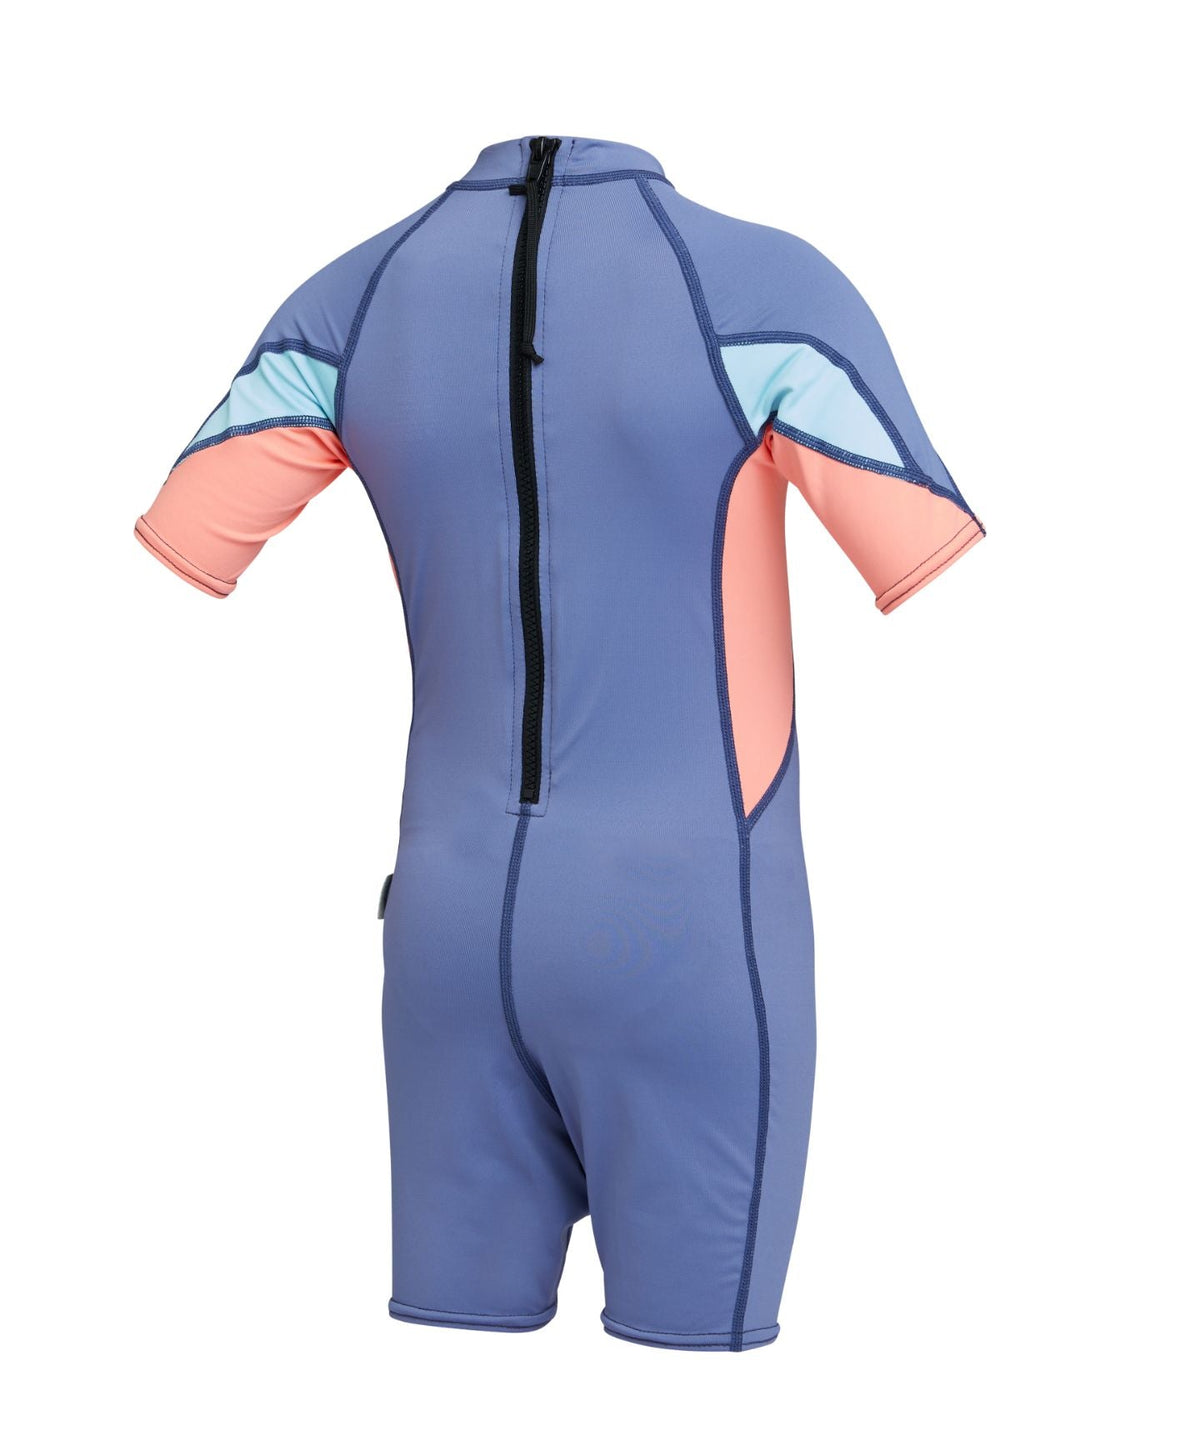 Toddlers SPF Short Sleeve Spring Rash Suit - Blue Ice